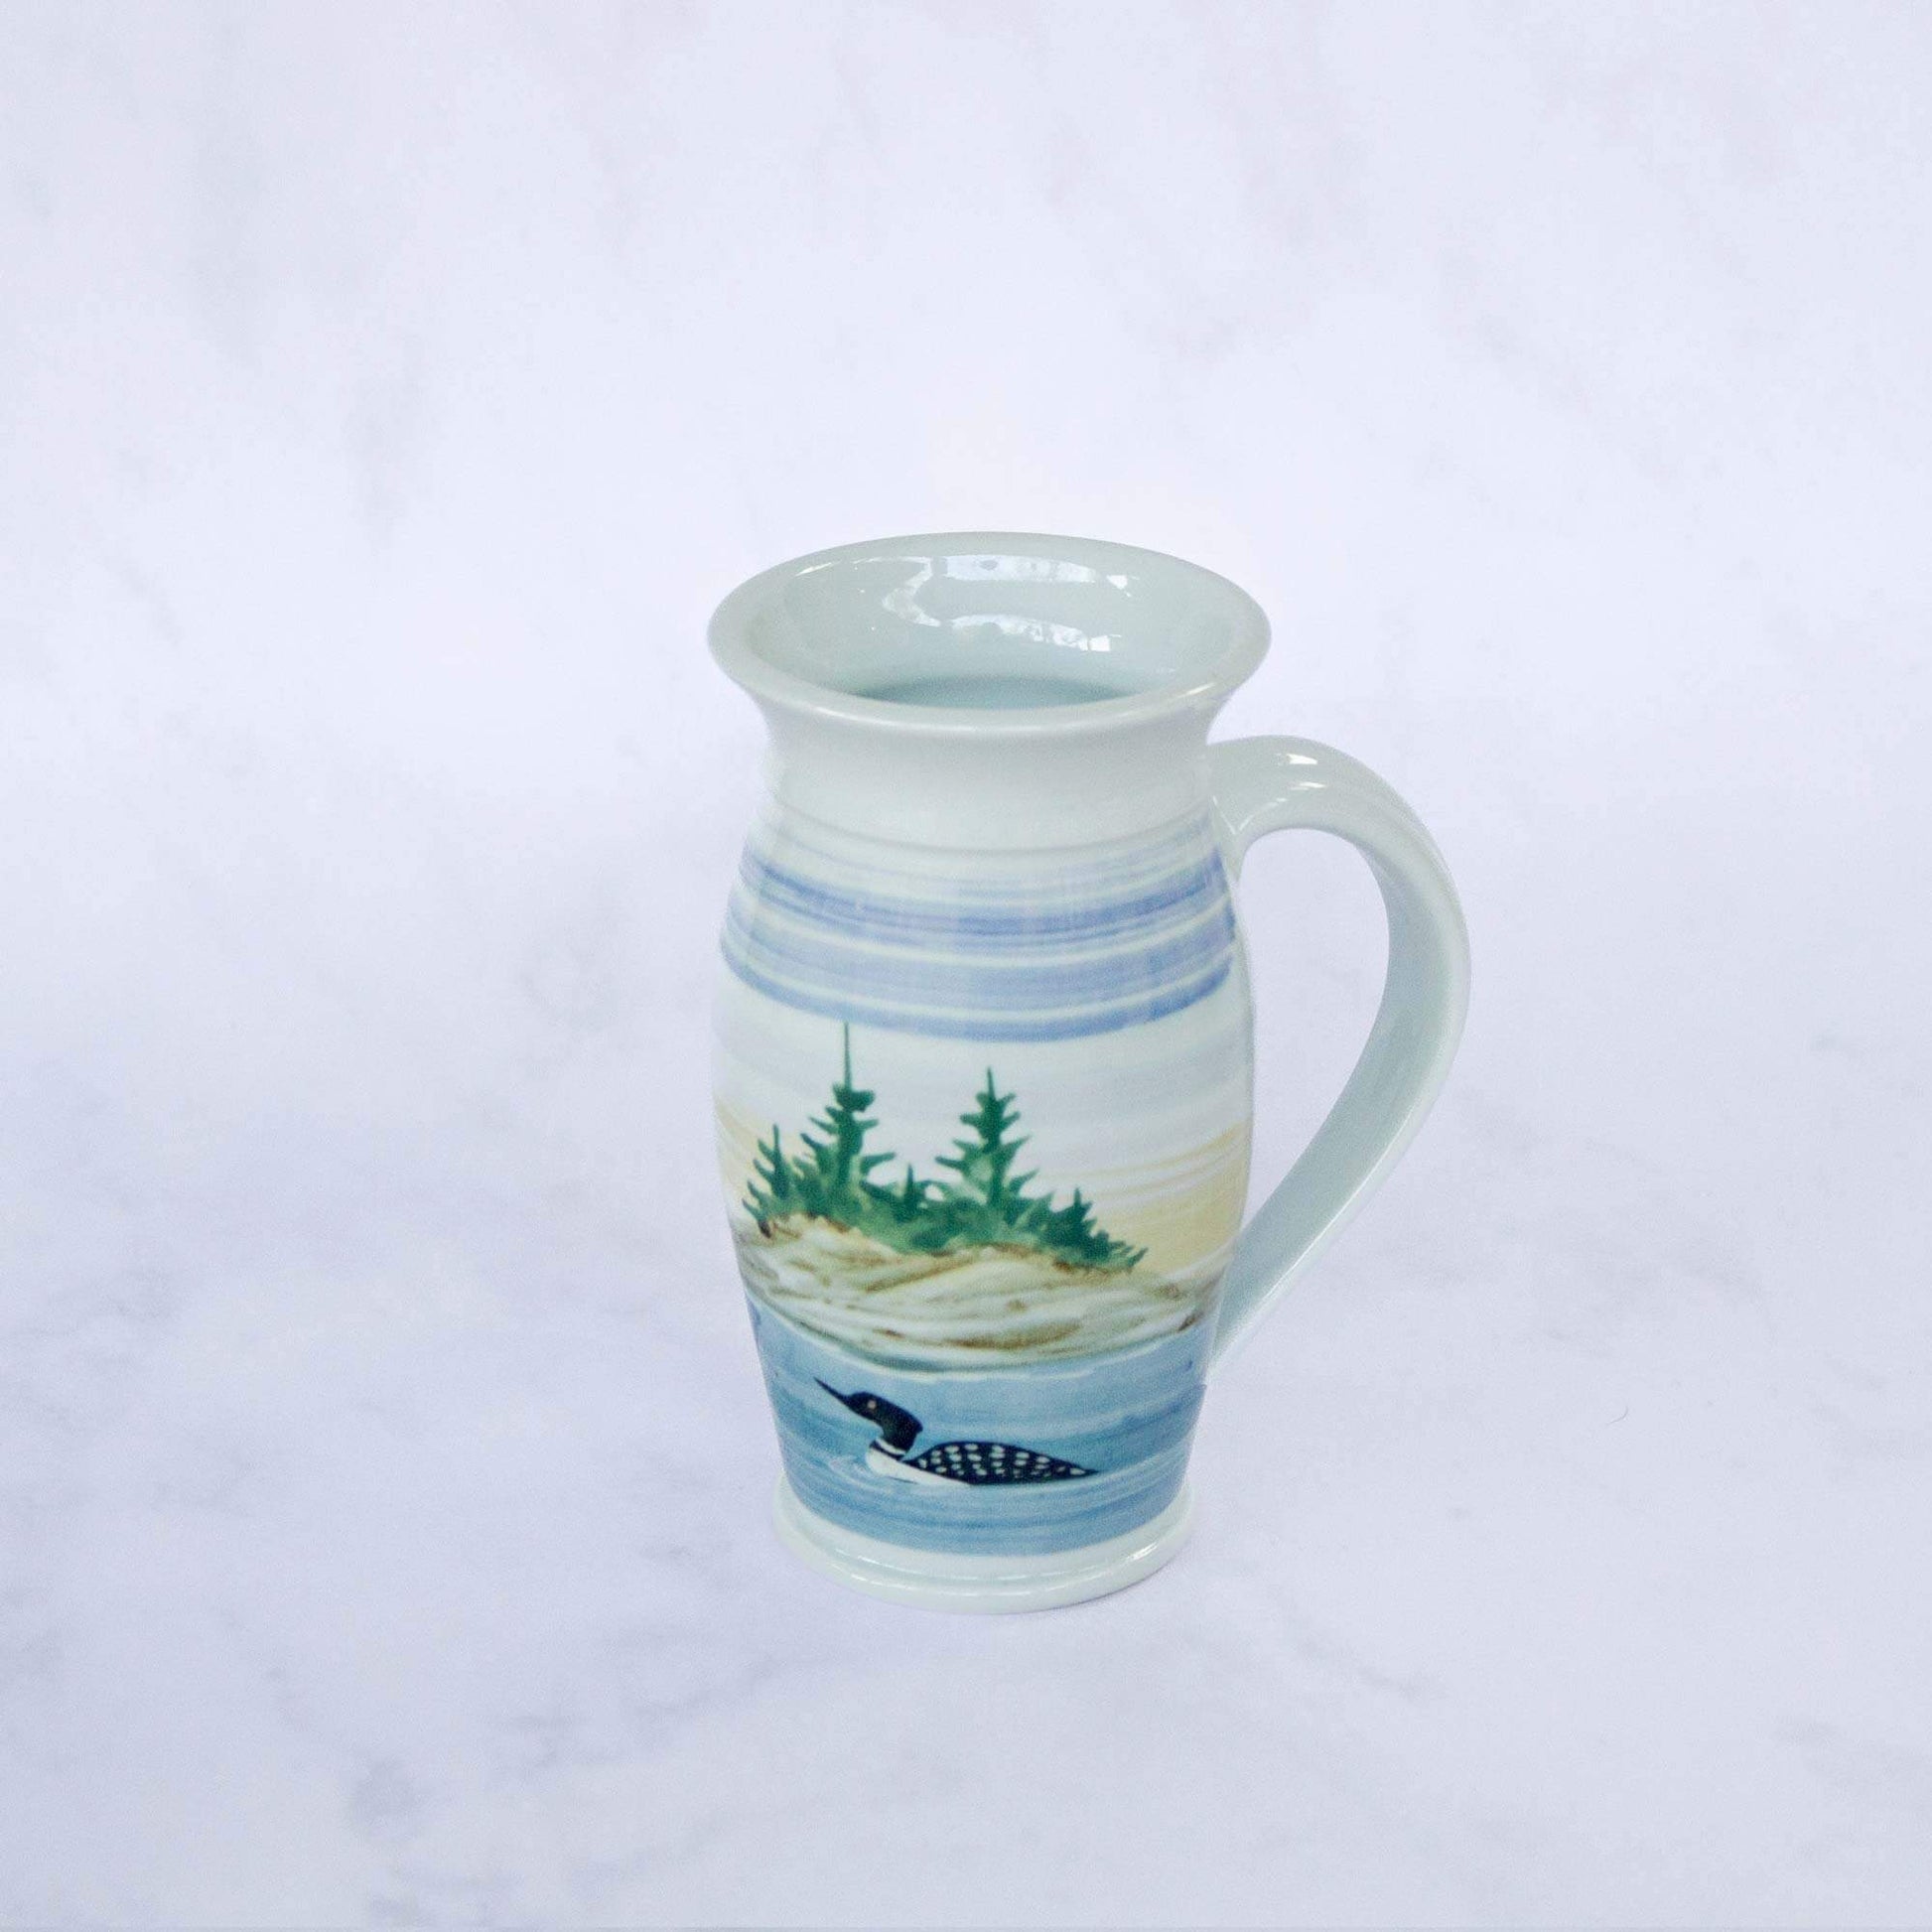 Handmade Pottery Beer Stein in Loon pattern made by Georgetown Pottery in Maine